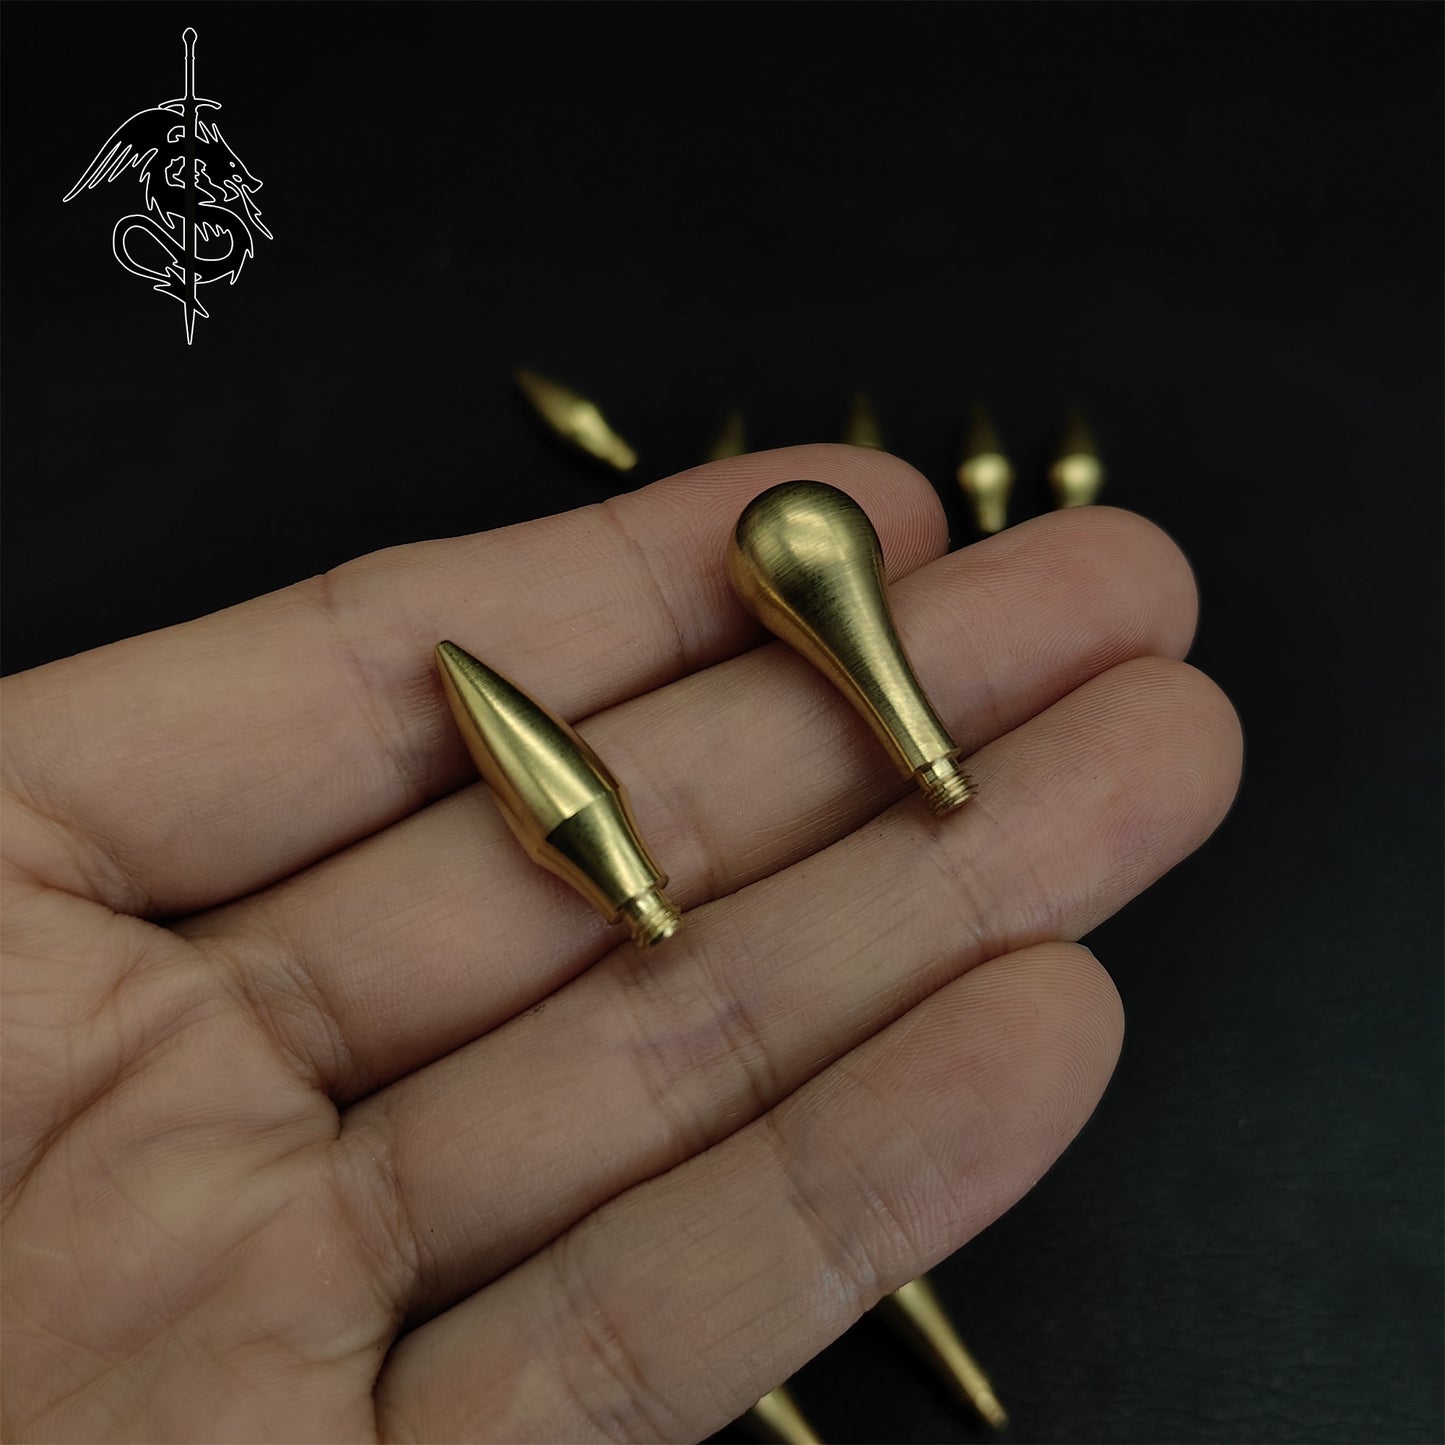 Brass Water Droplet And Sun Rotating Toy Fingertip Spinner